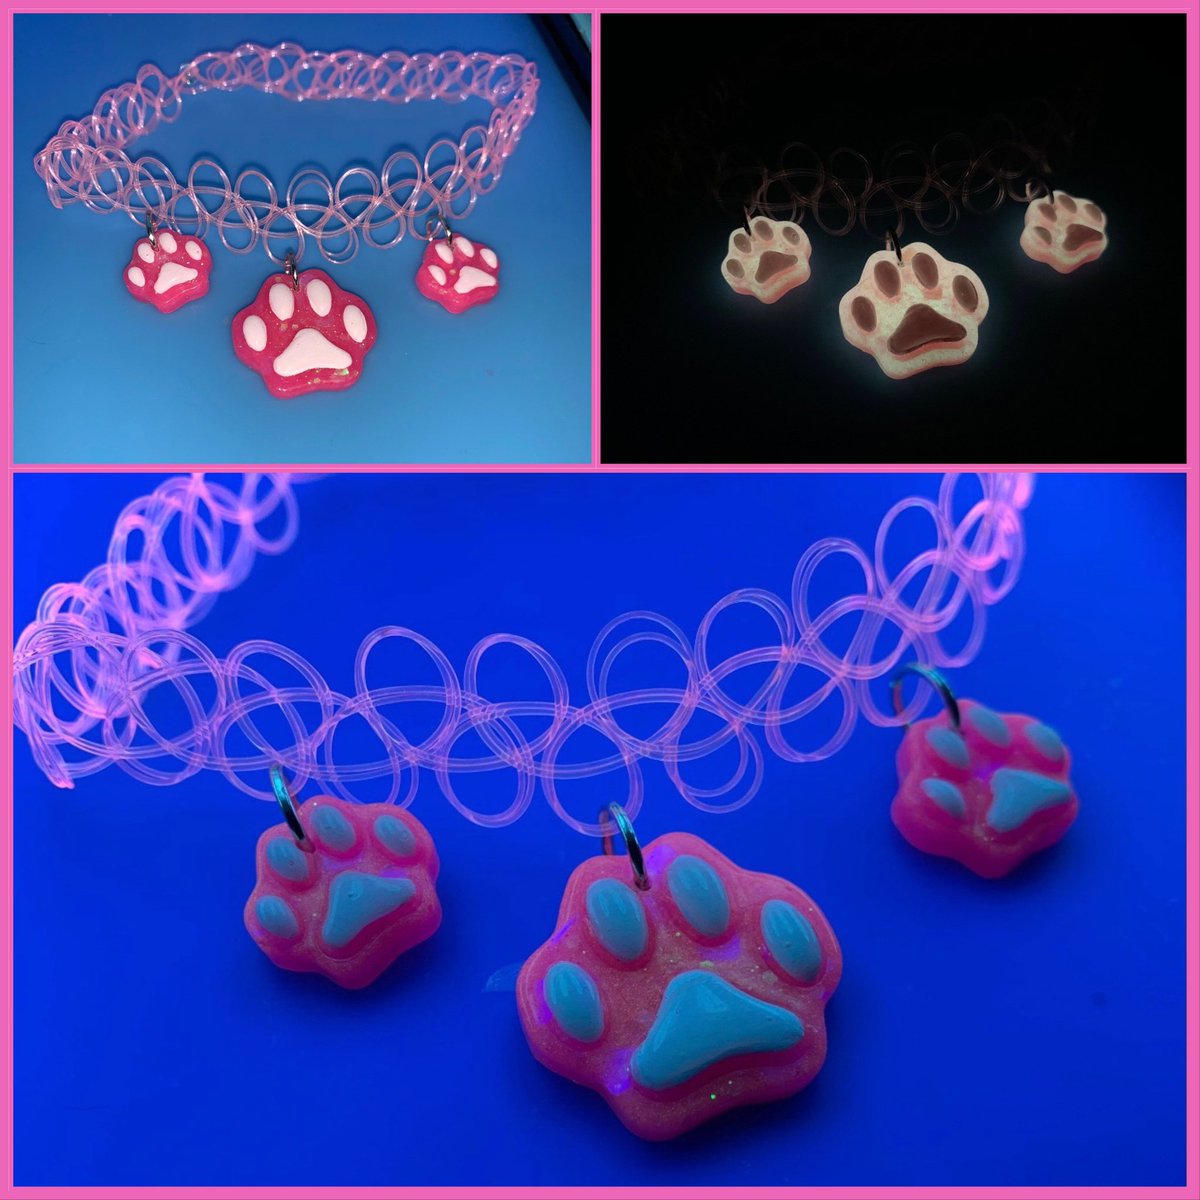 💖💚 I got two glow in the dark chokers left! I have other cat chokers up for sale too on my Etsy! 💚💖 

(✿´ ꒳ ` ) ✨ 🐾 🐈‍⬛ ✨ 

etsy.me/2T4Nbrz

#artist #chokers #necklaces #catchoker #catpaws #glowinthedarkart #glowinthedarknecklace